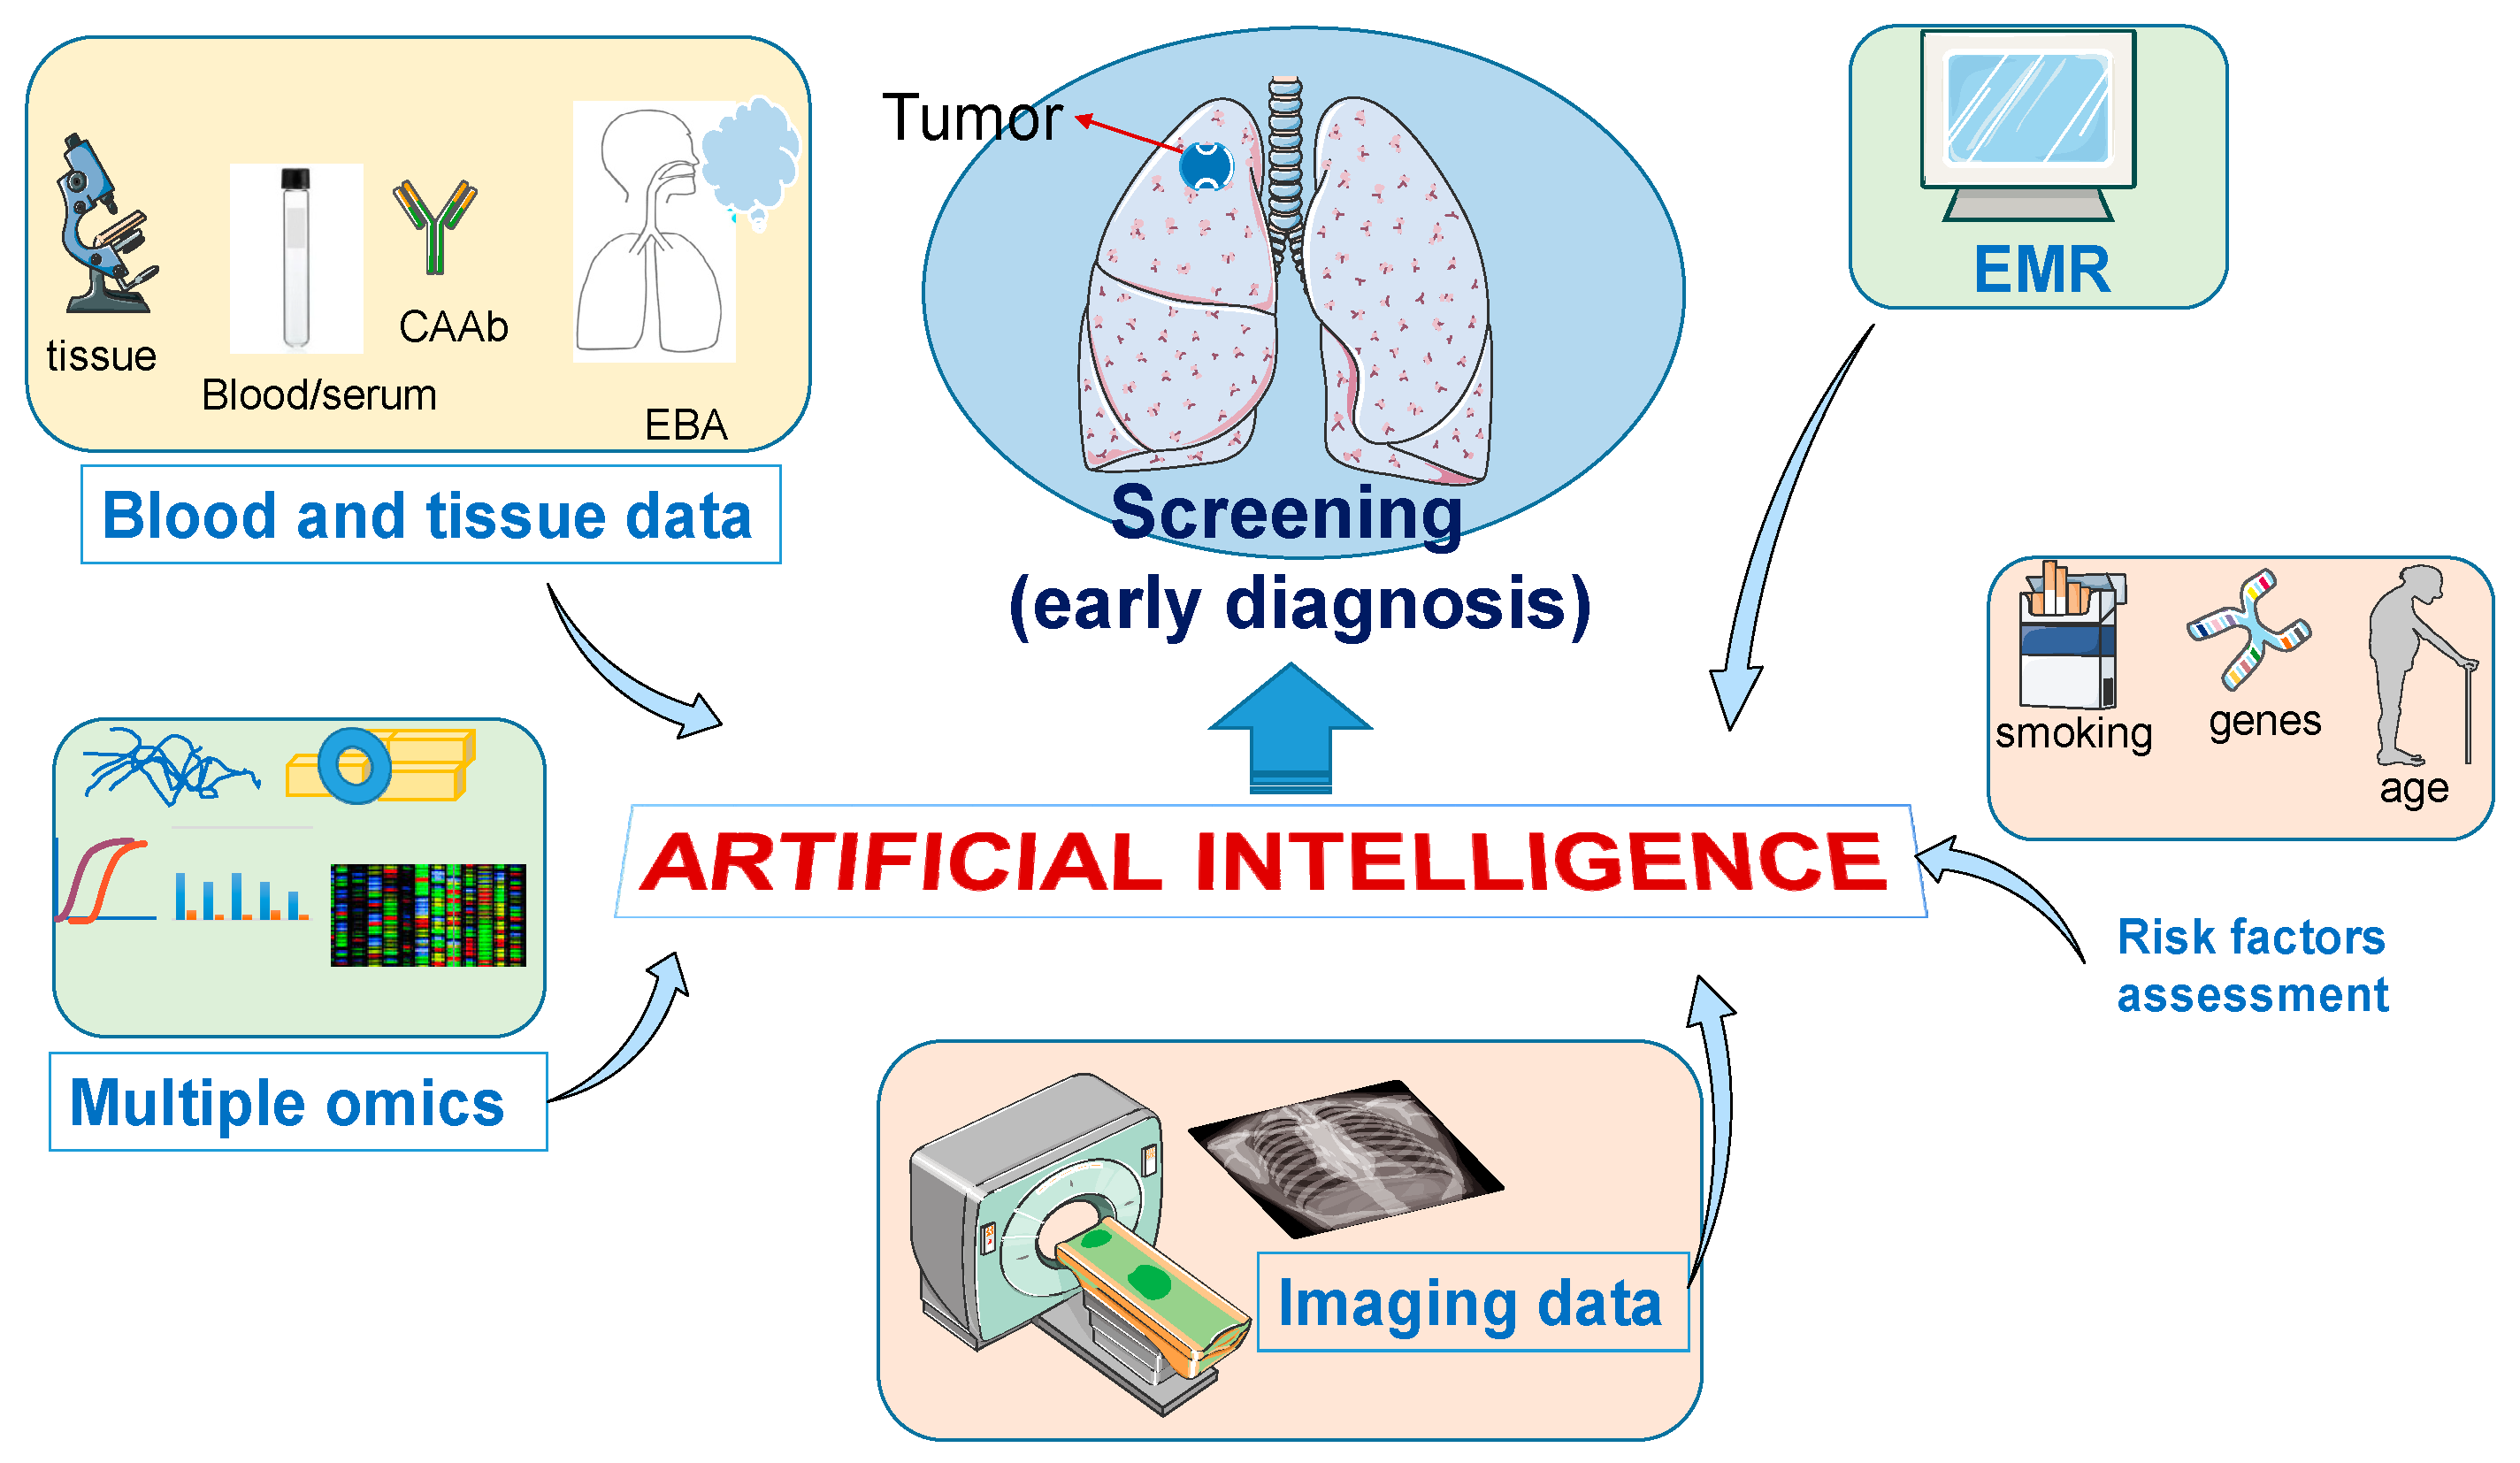 AI system detects cancer tumours missed by conventional diagnostics